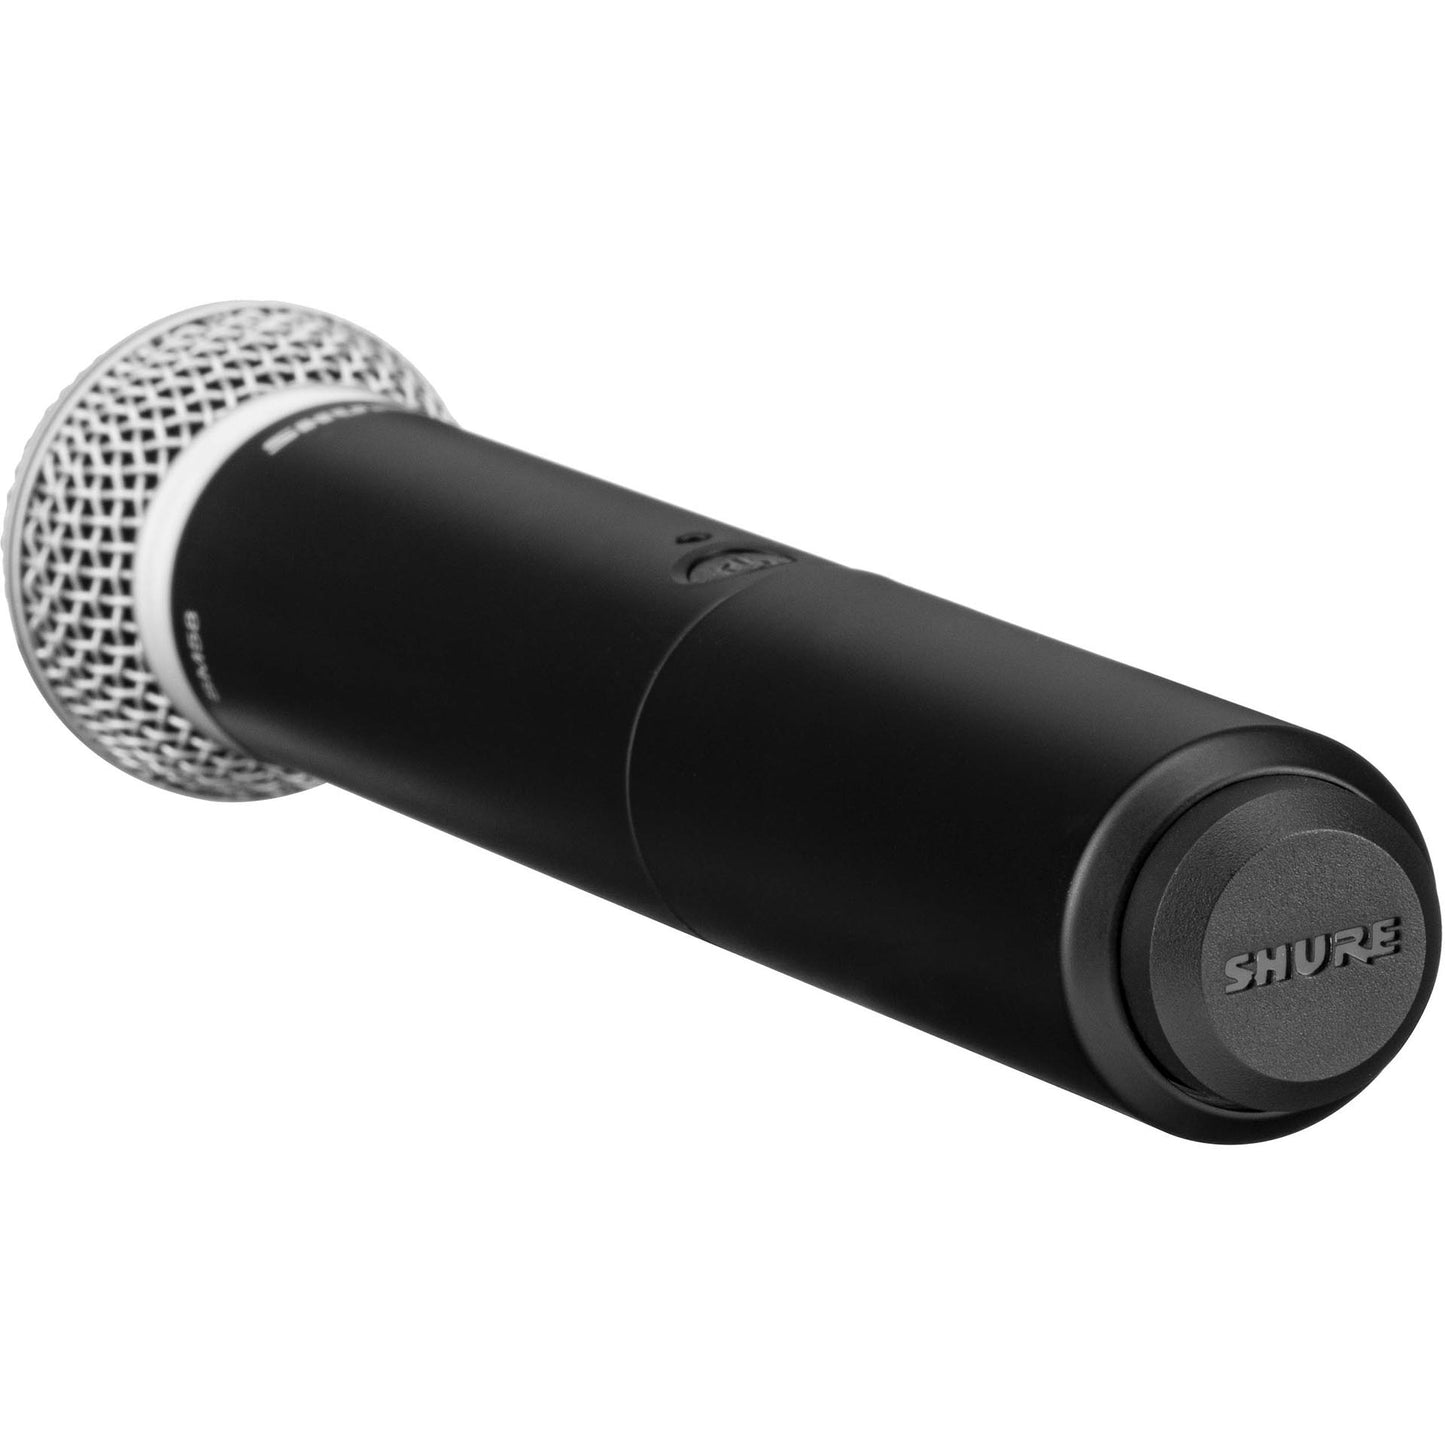 Shure BLX24/PG58 Wireless Mic System with PG58 Handheld Vocal Mic - J11